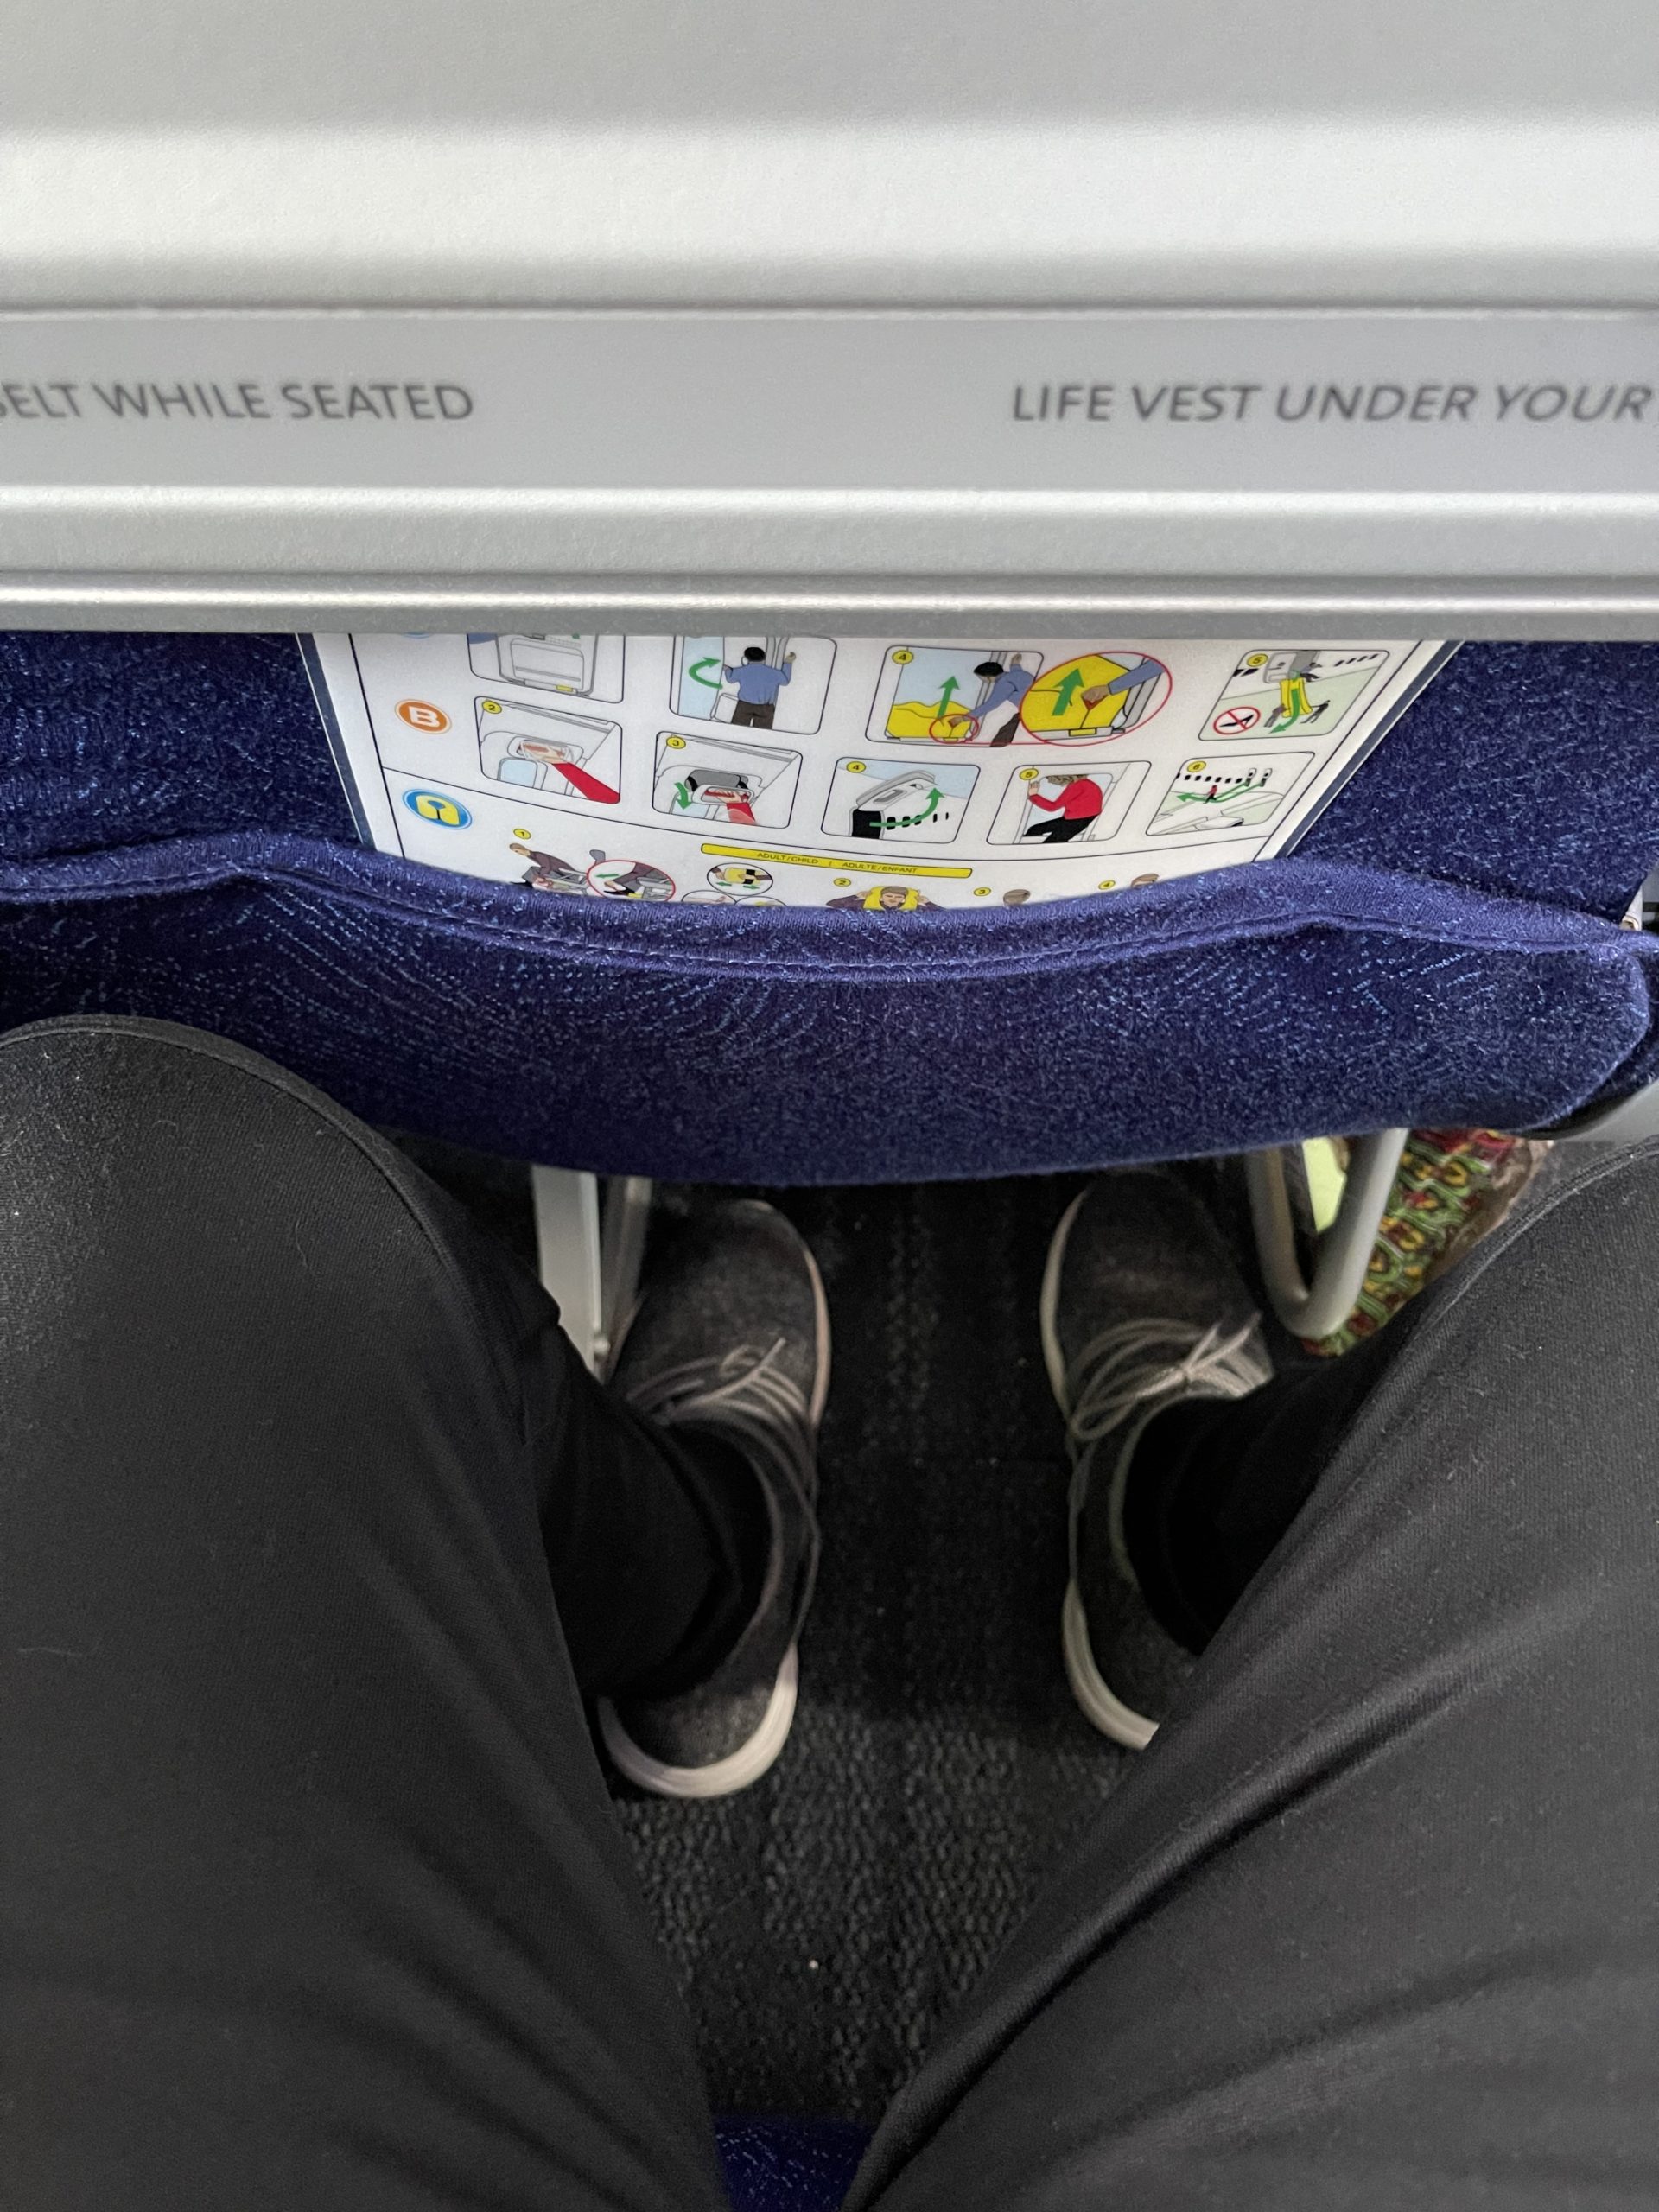 Flair airlines review